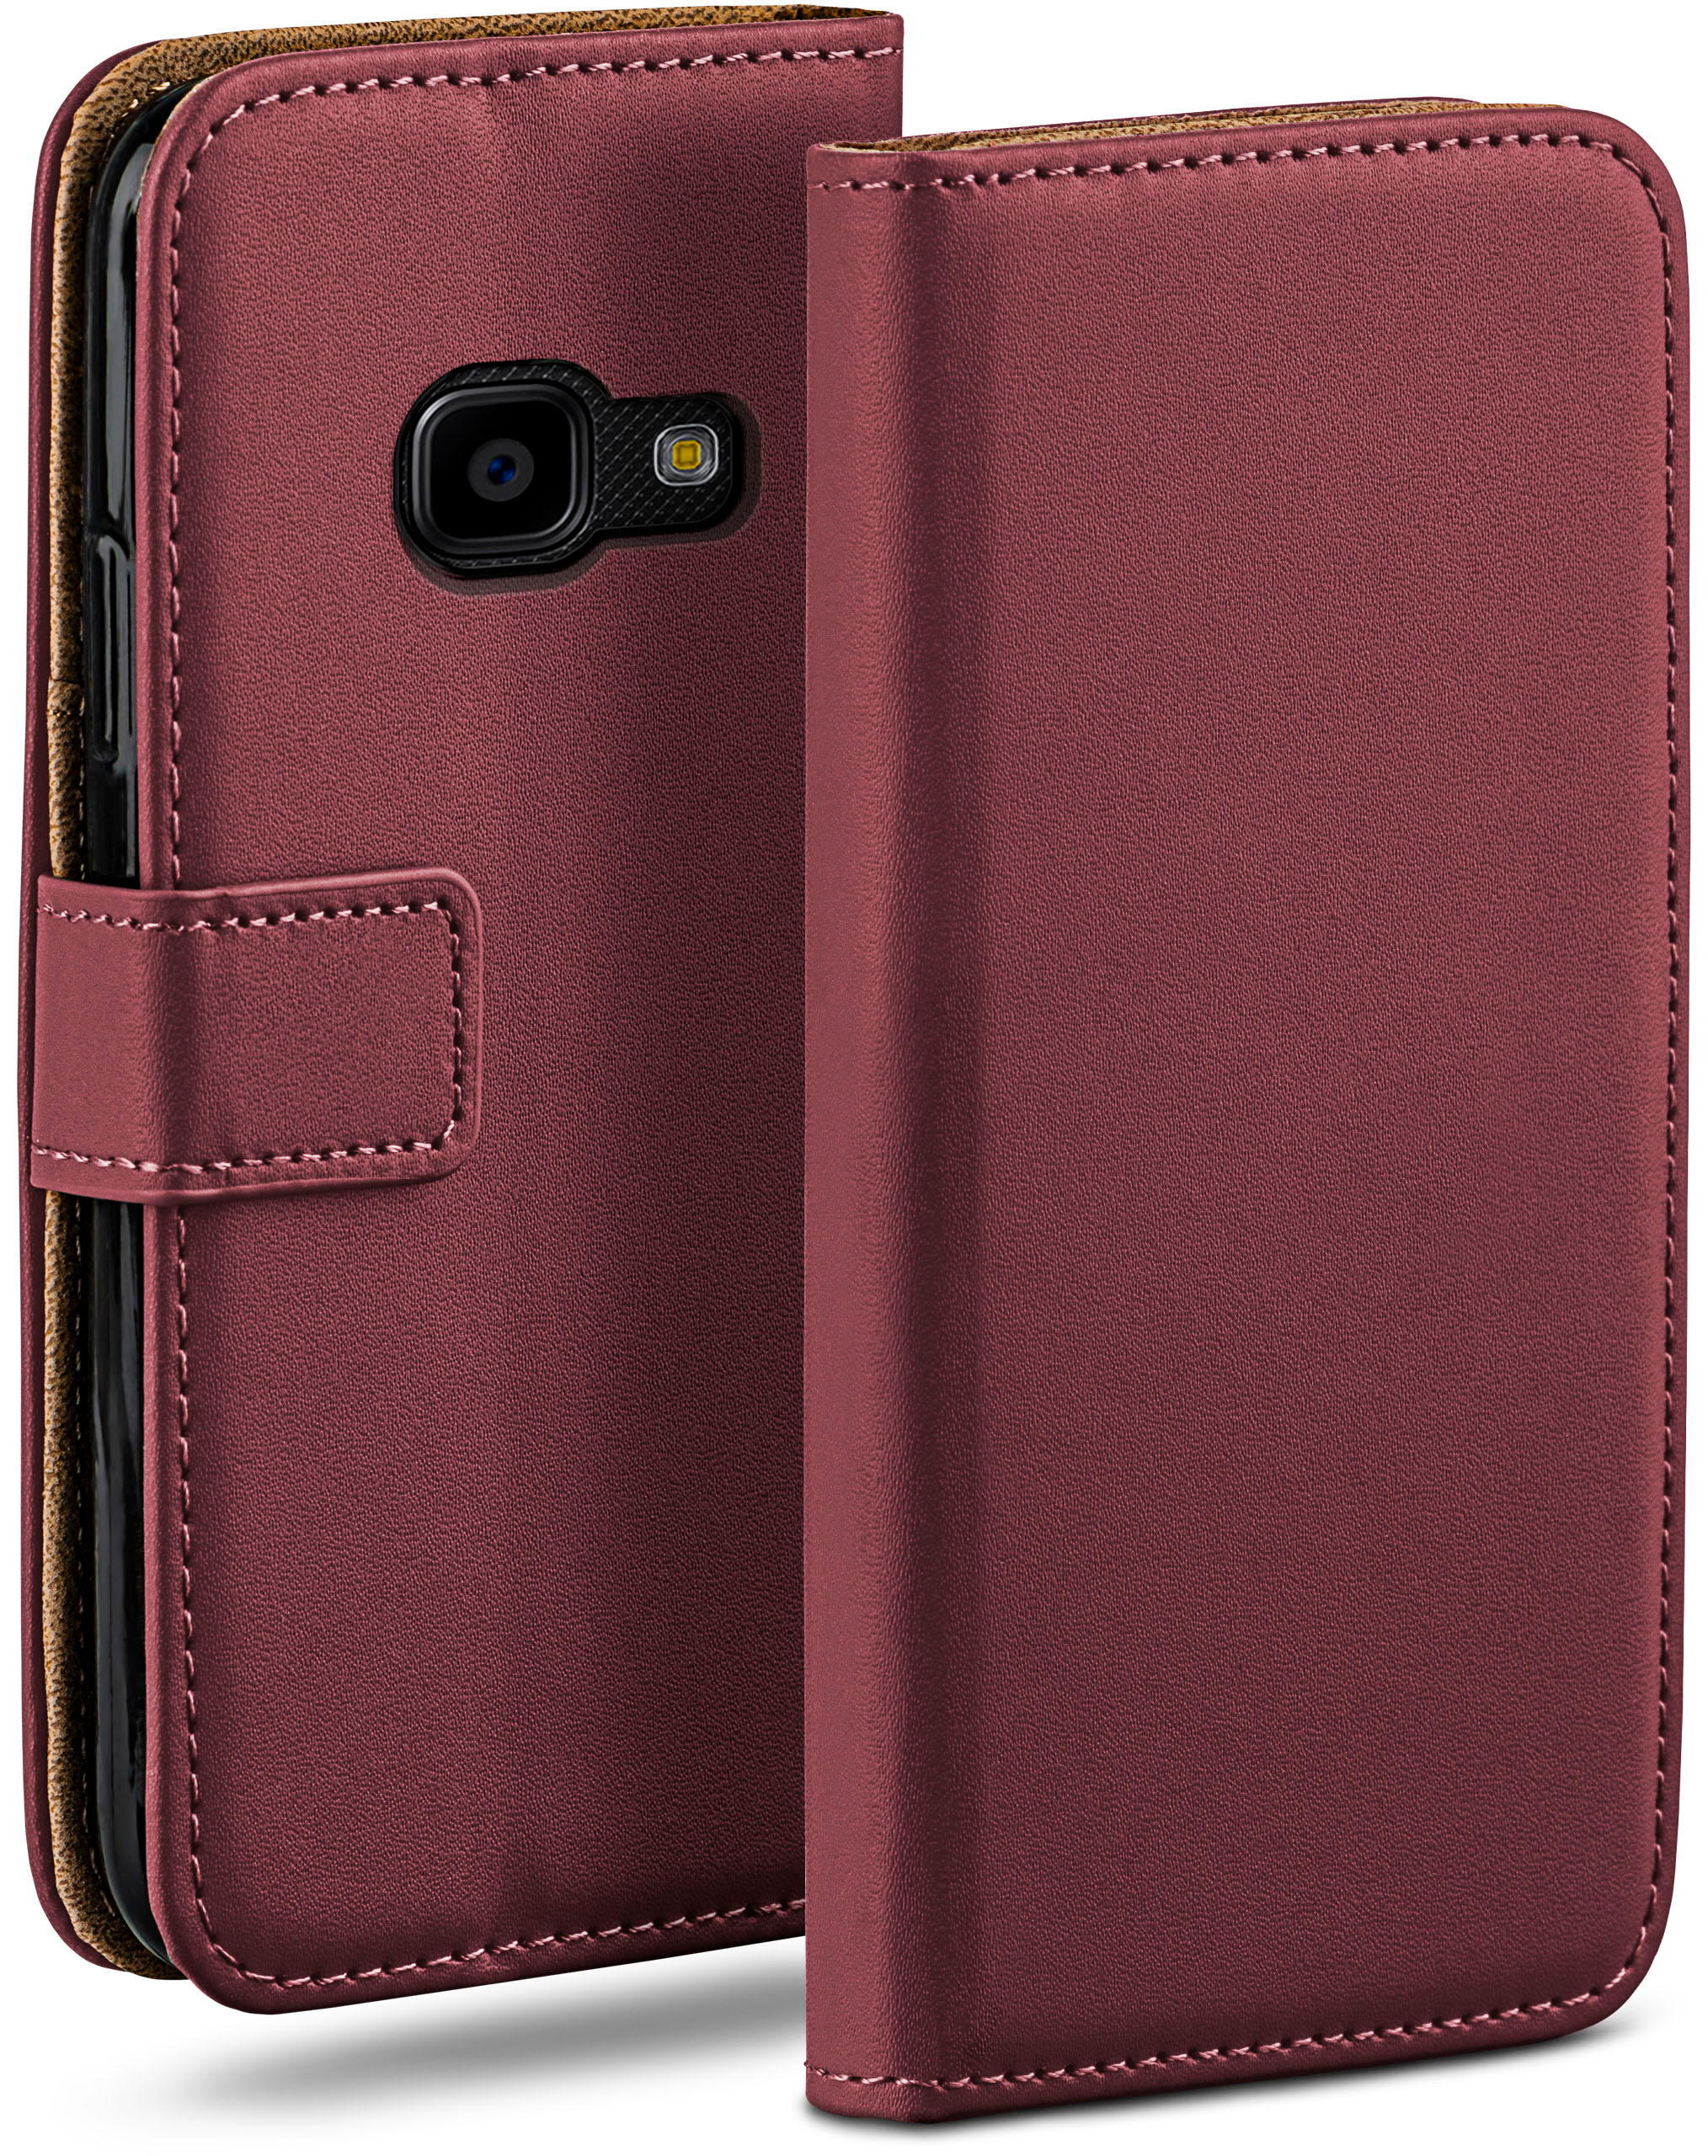 Case, Samsung, Xcover Book Bookcover, Maroon-Red 4, MOEX Galaxy